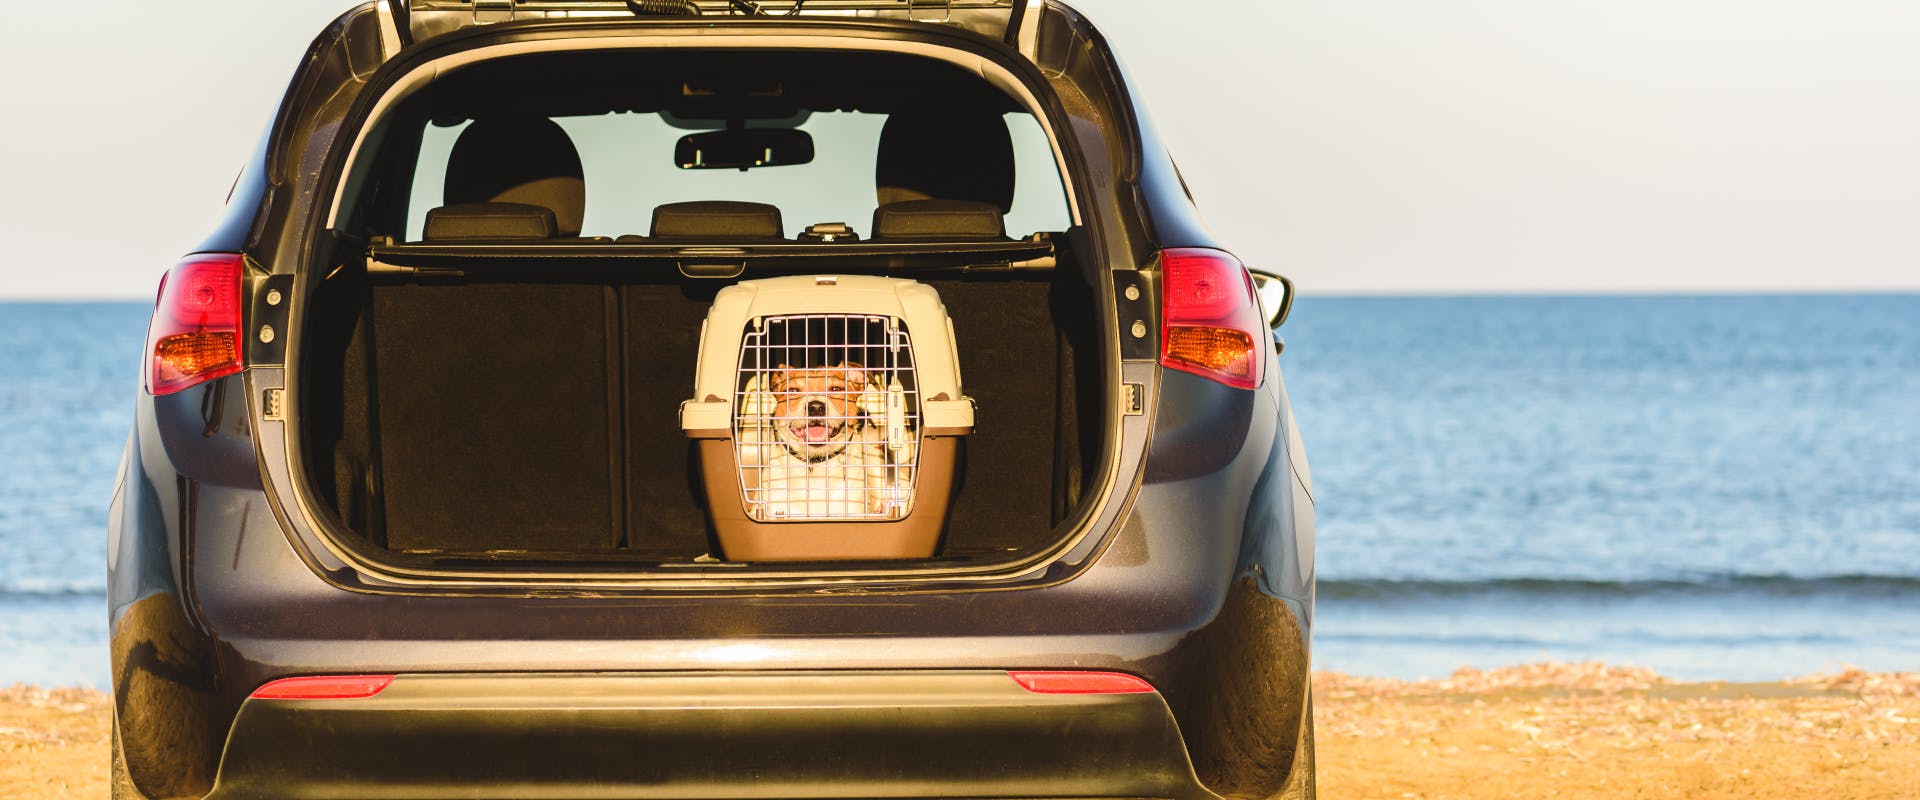 a terrier inside a travel dog crate in the back of an open car boot